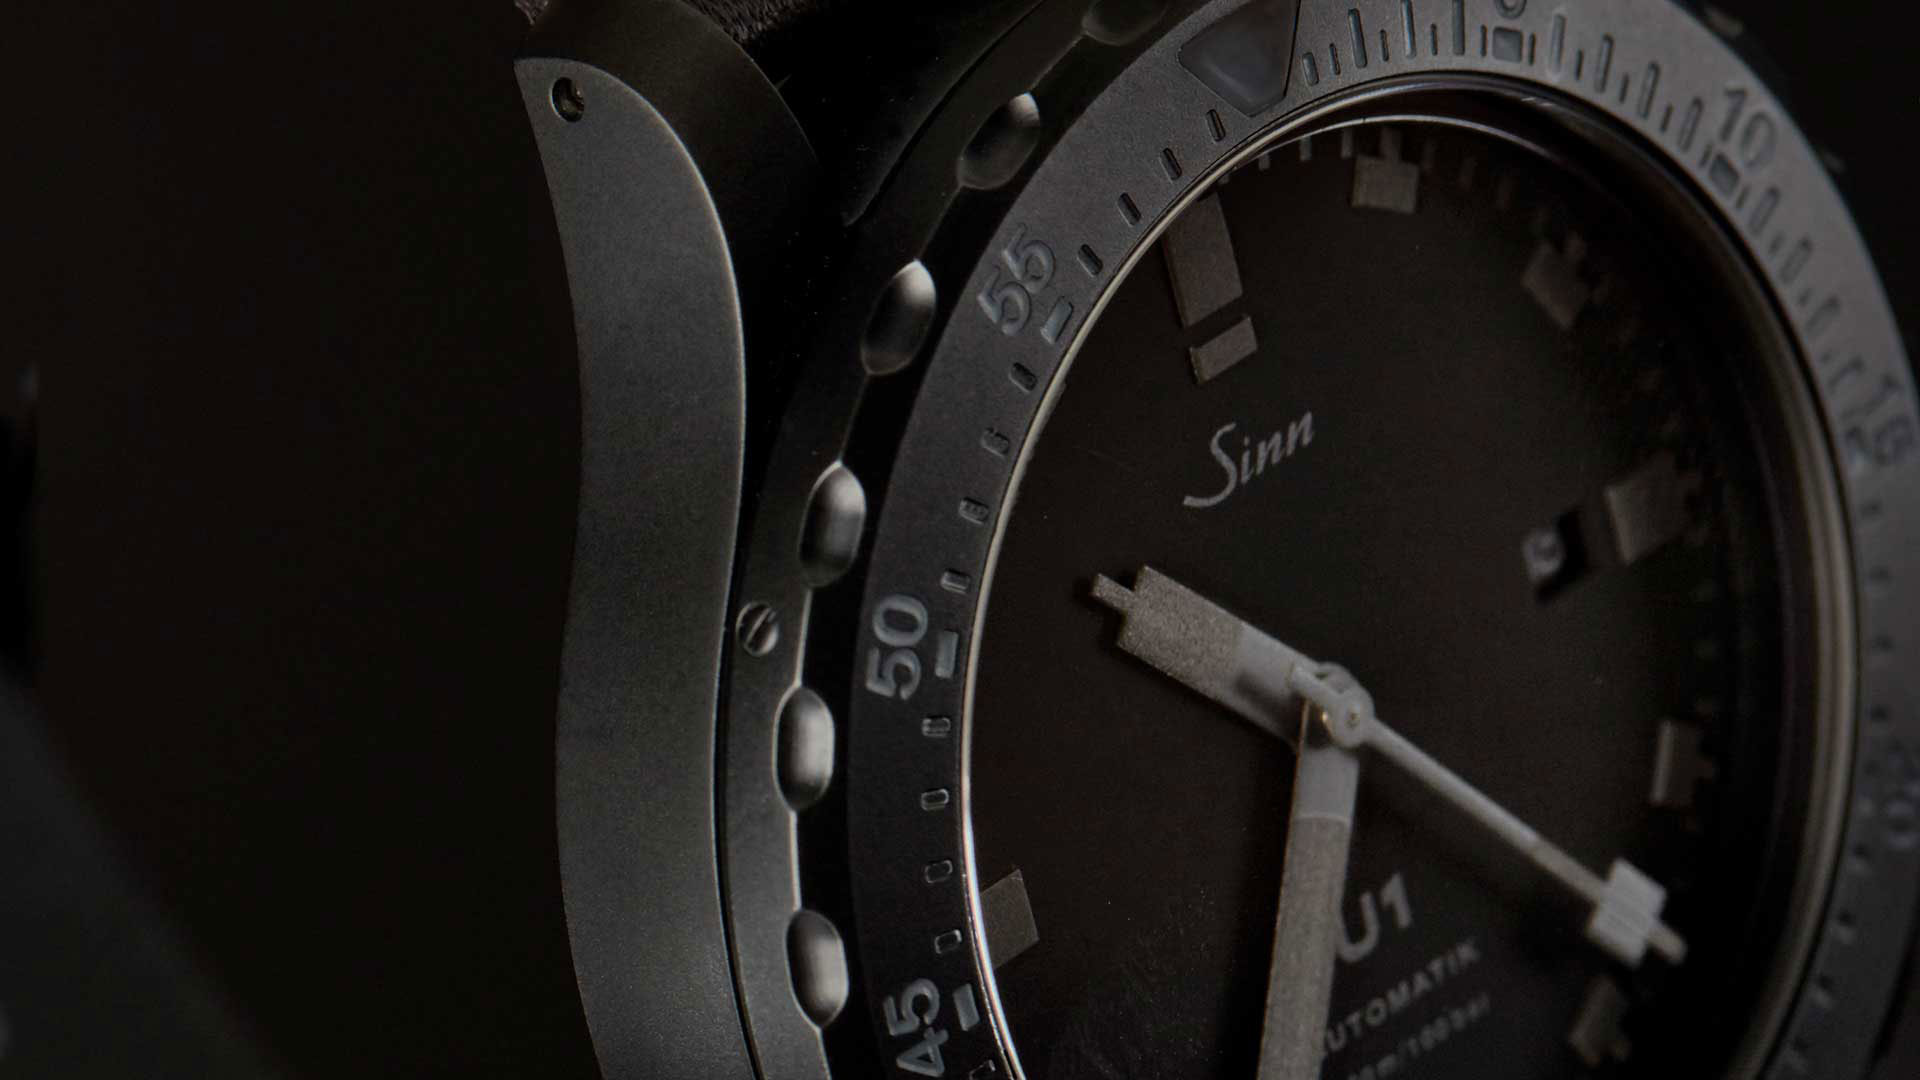 Closeup of watch face photographed by accessories still life product photographer Kate Benson.